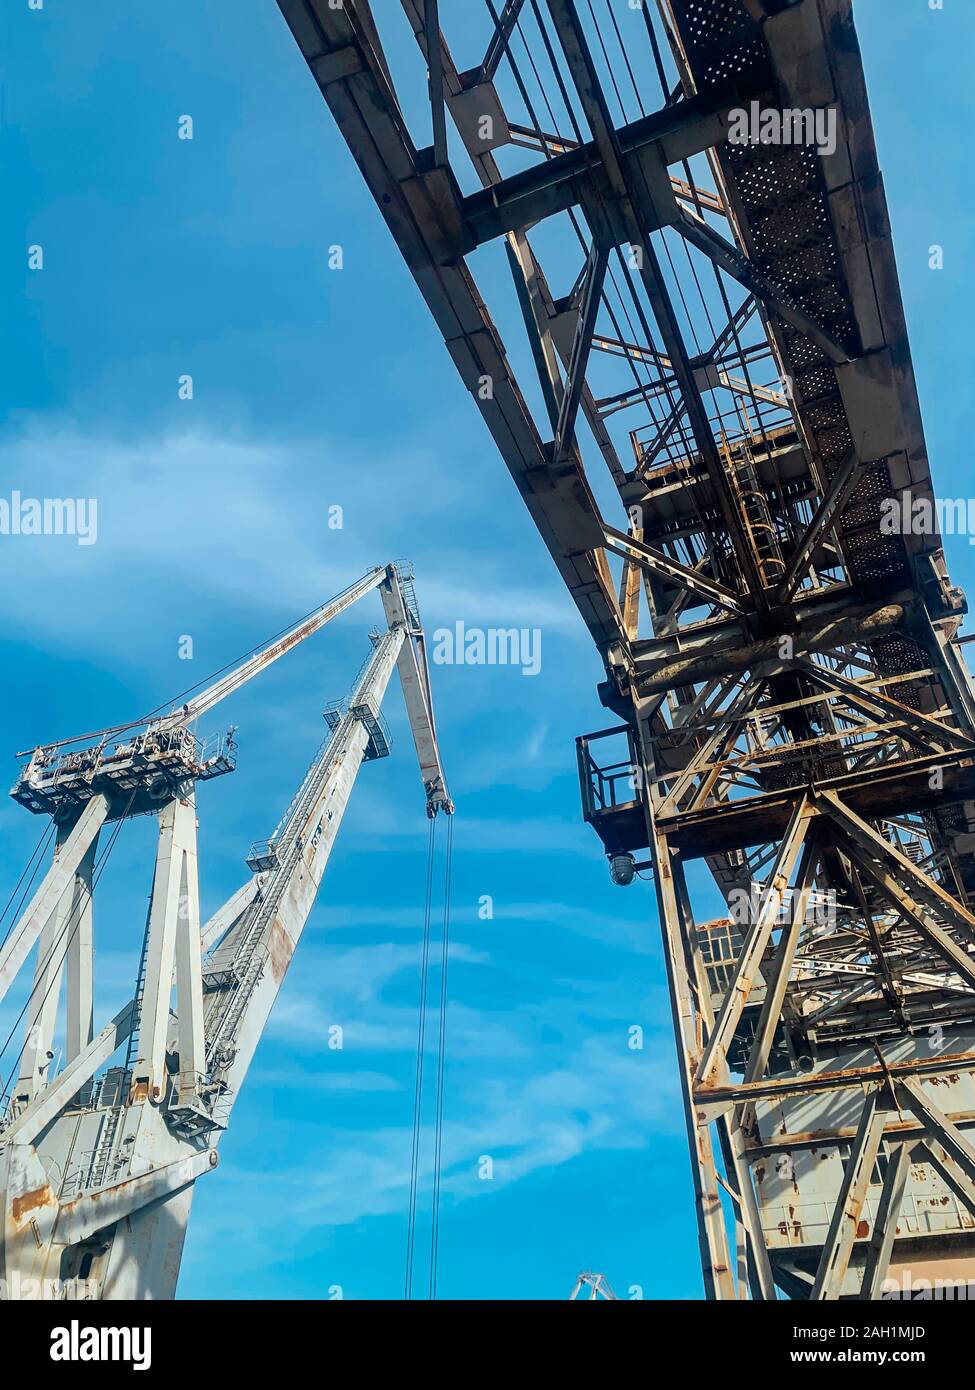 large metal cranes at the plant for lifting cargo Stock Photo